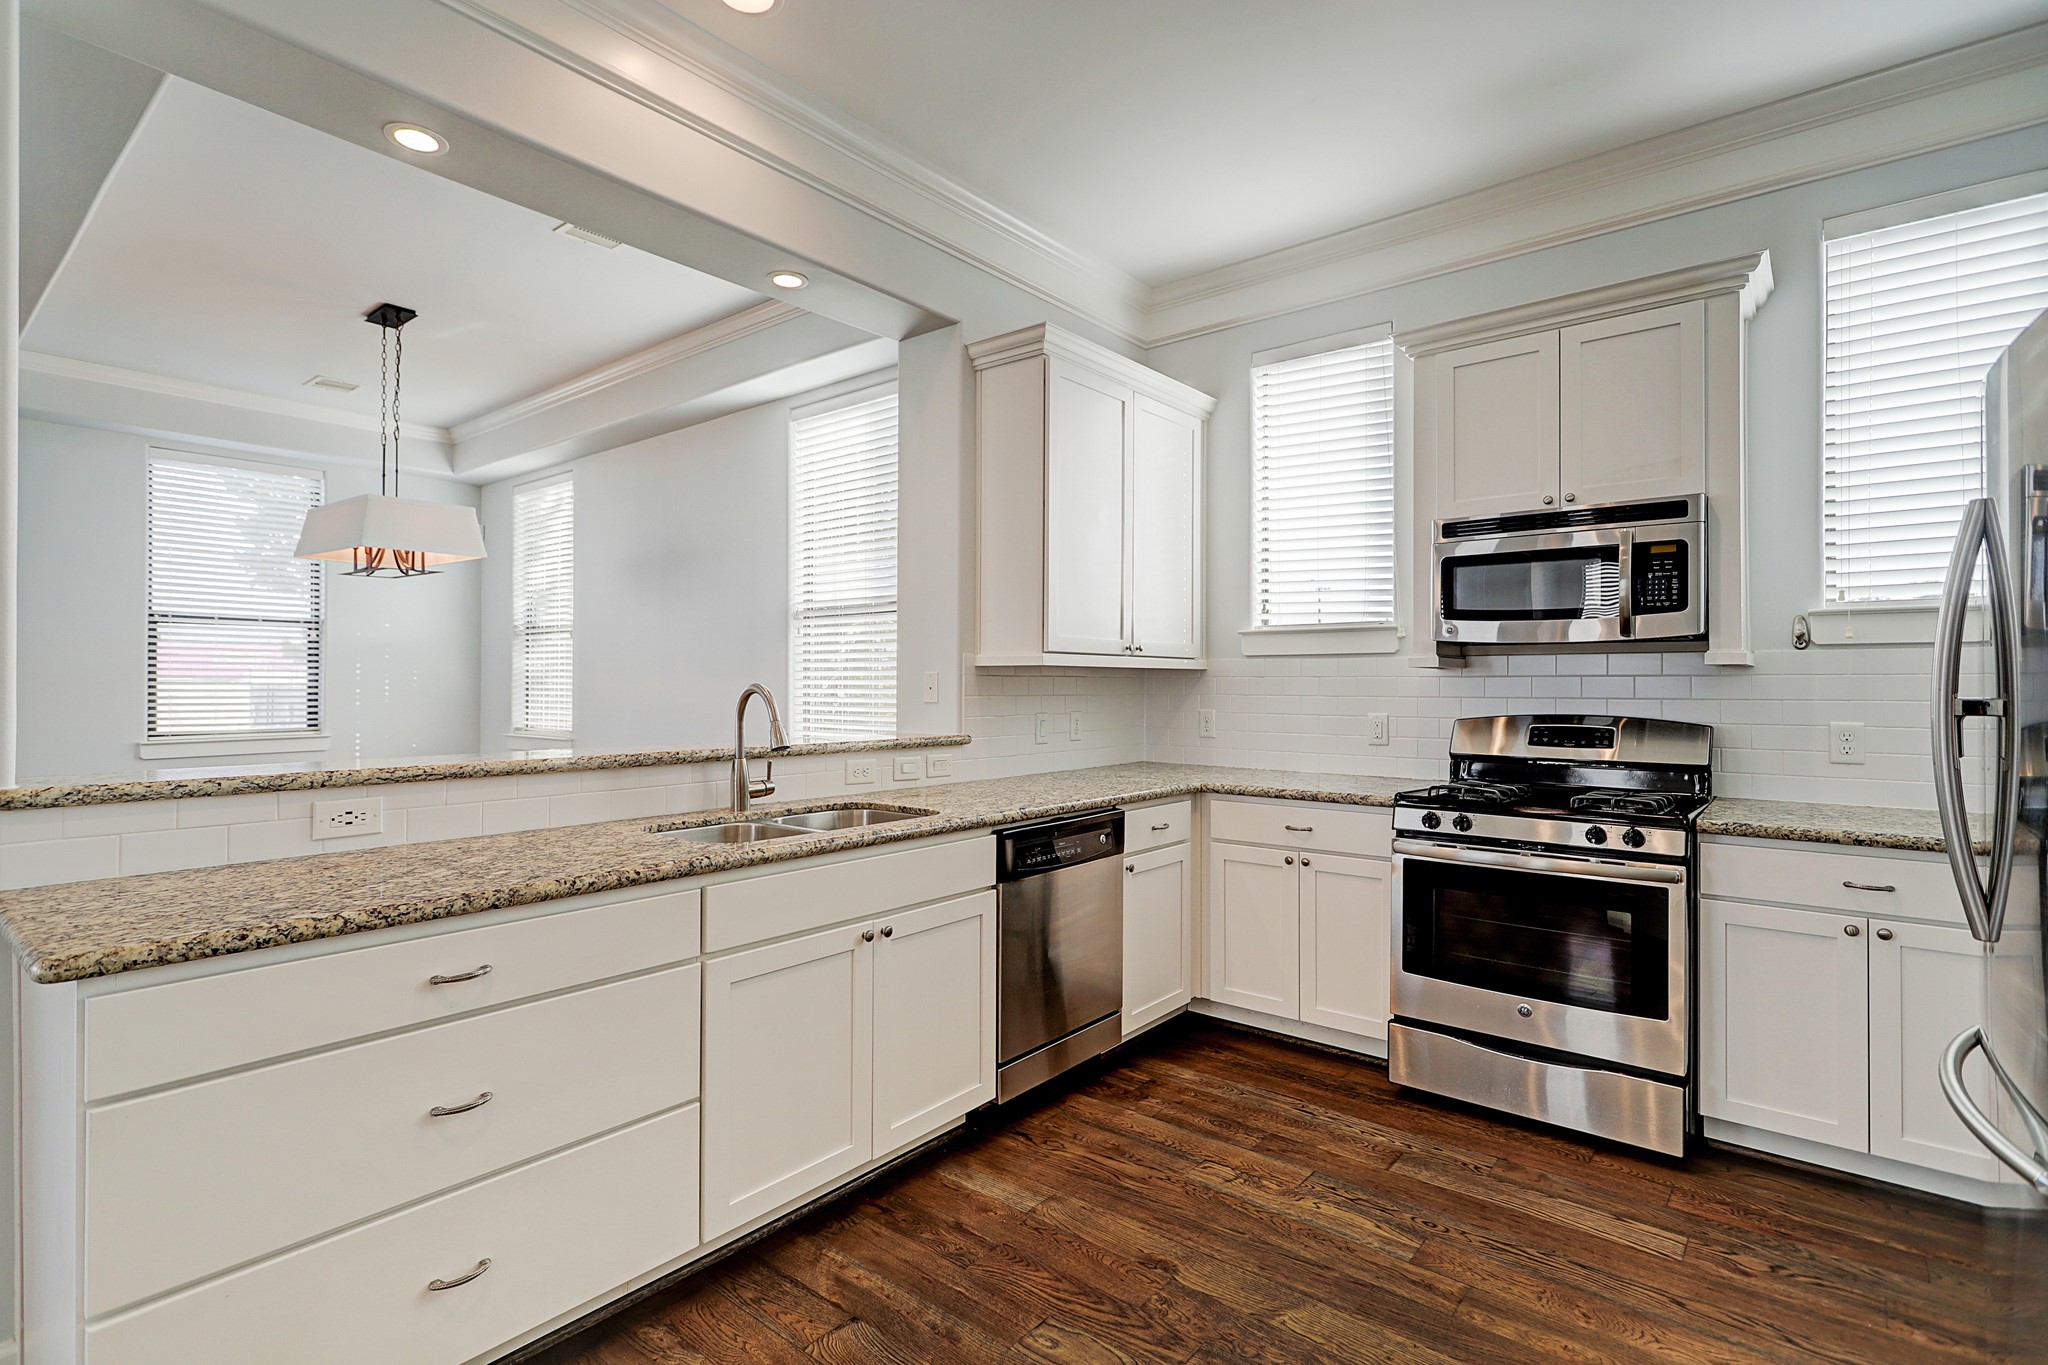 Amenities worth noting in the kitchen include granite counters with stainless appliances.